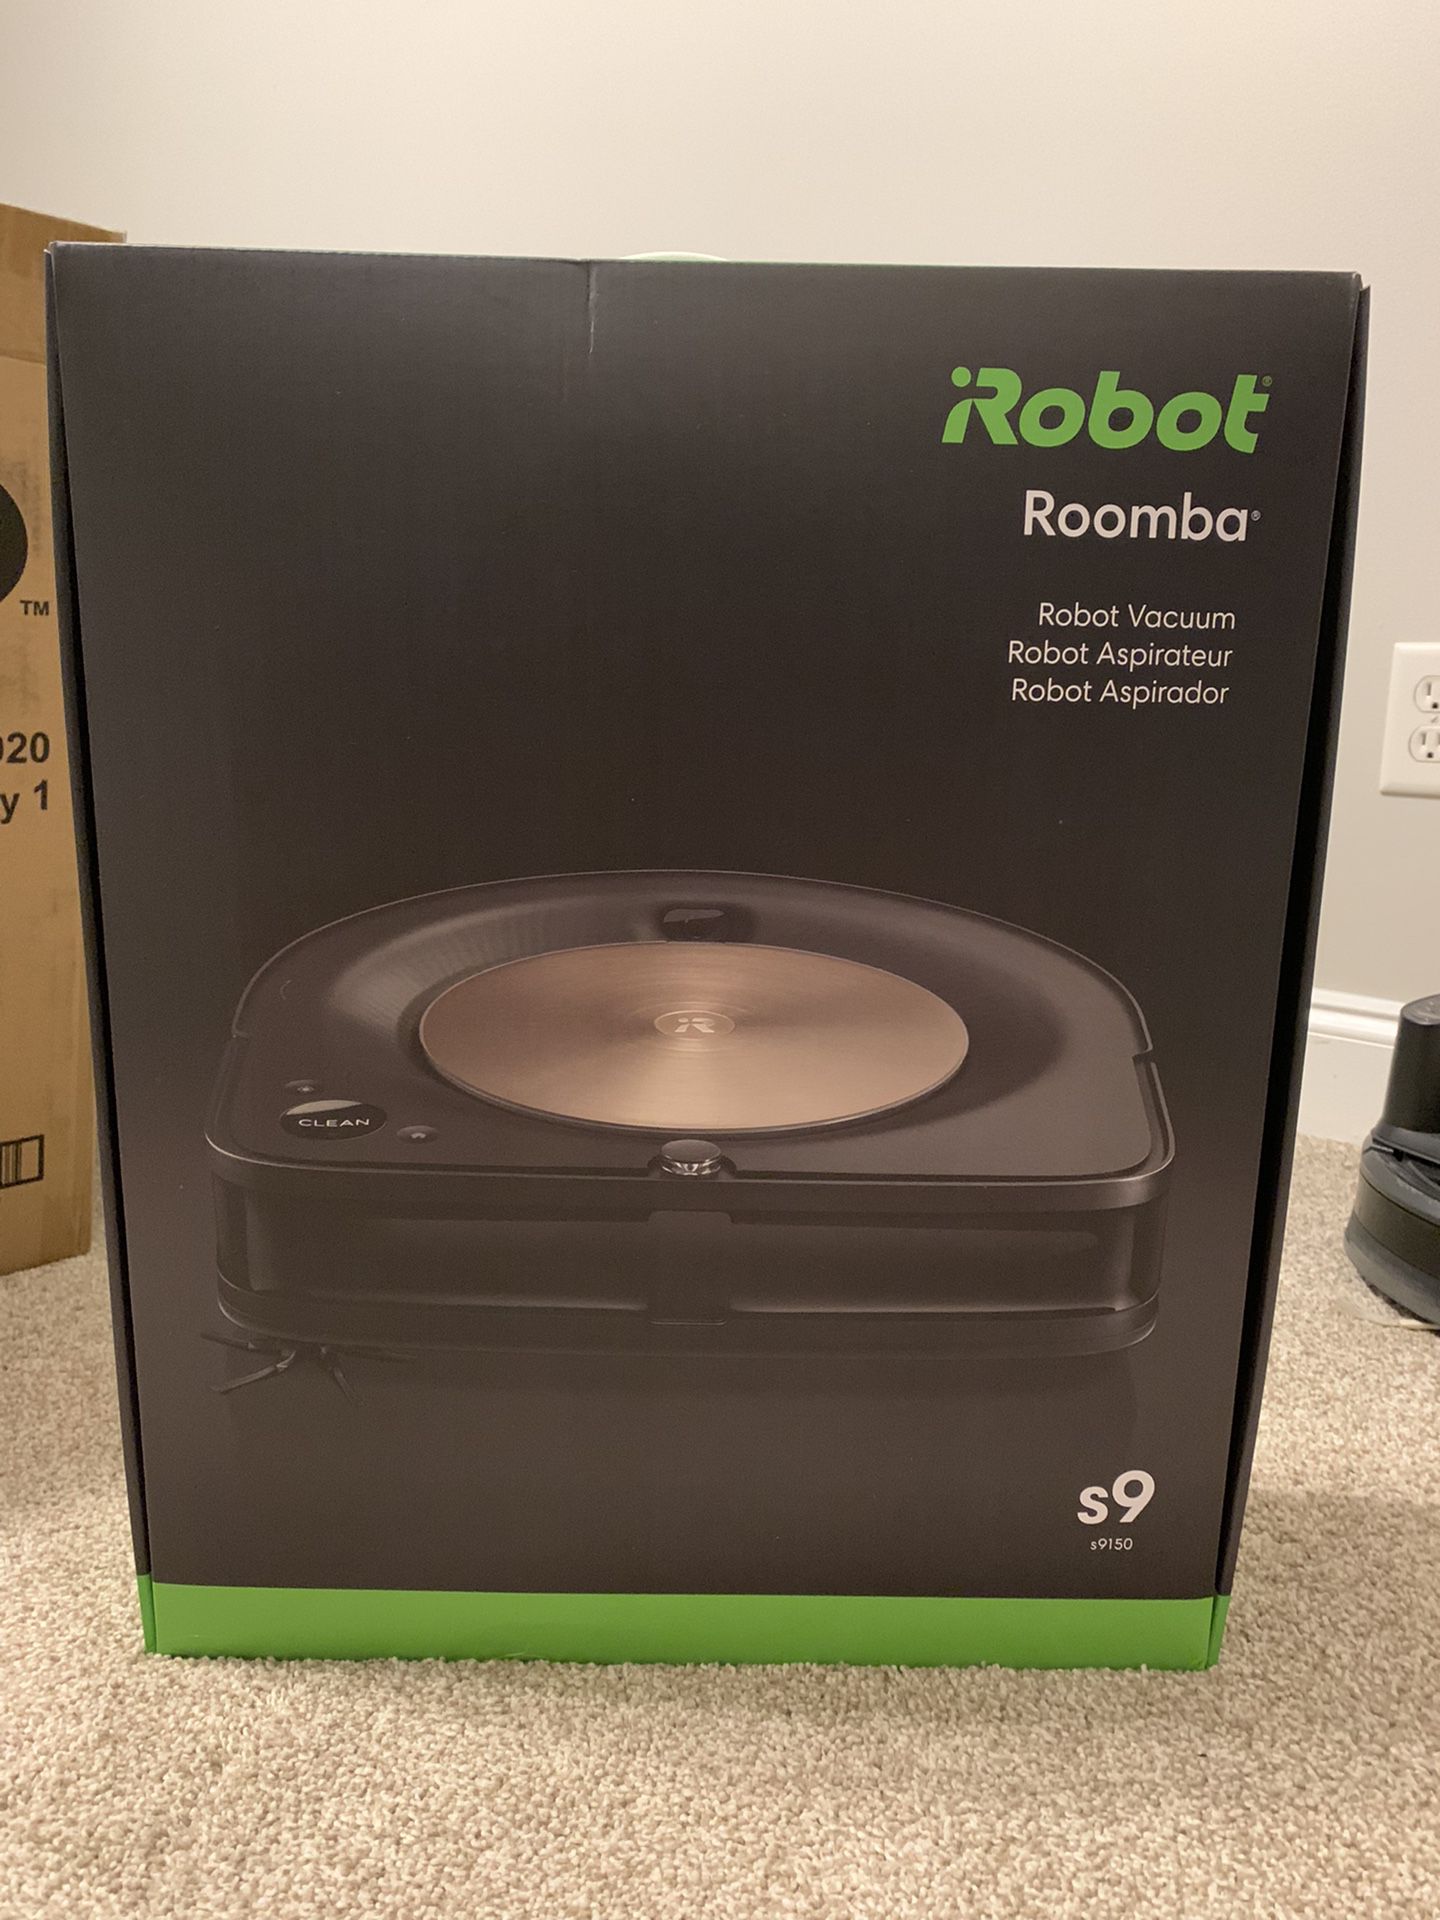 Robot Roomba S9 (9150) Robot Vacuum- Wi-Fi Connected, Smart Mapping, Powerful Suction, Works with Alexa, Ideal for Pet Hair, Works With Clean Base  Br